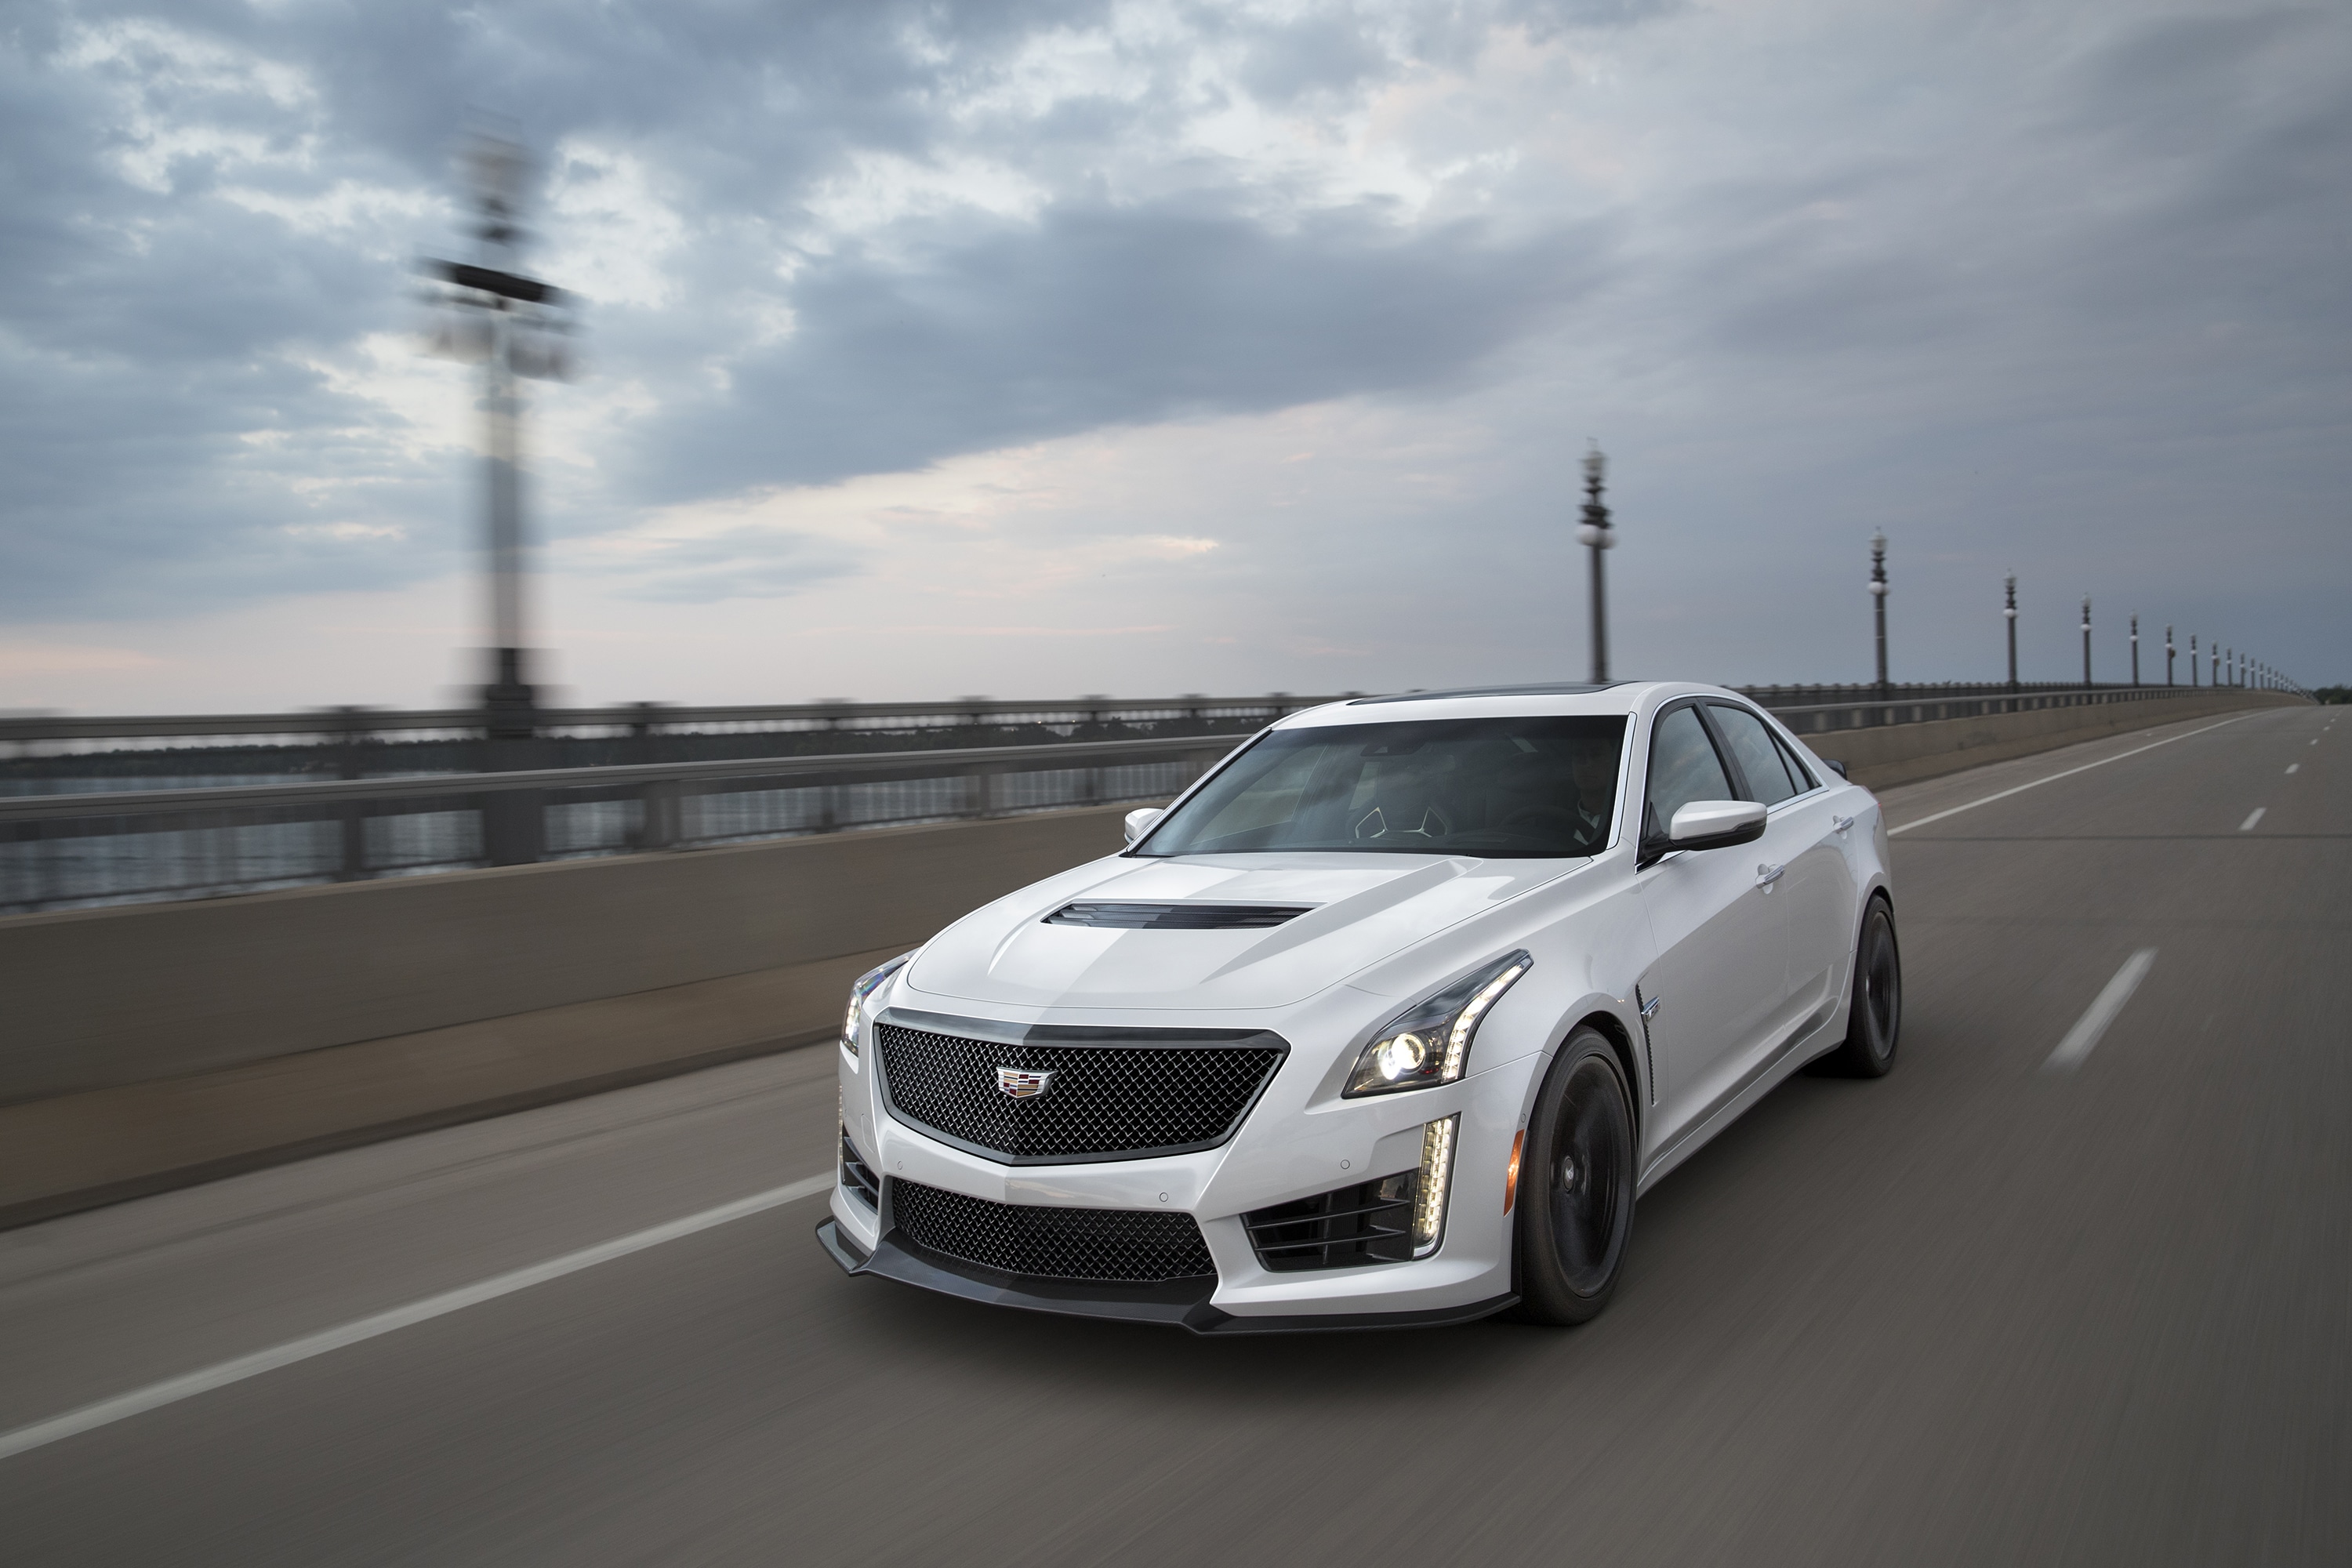 Best Tires for Cadillac CTS